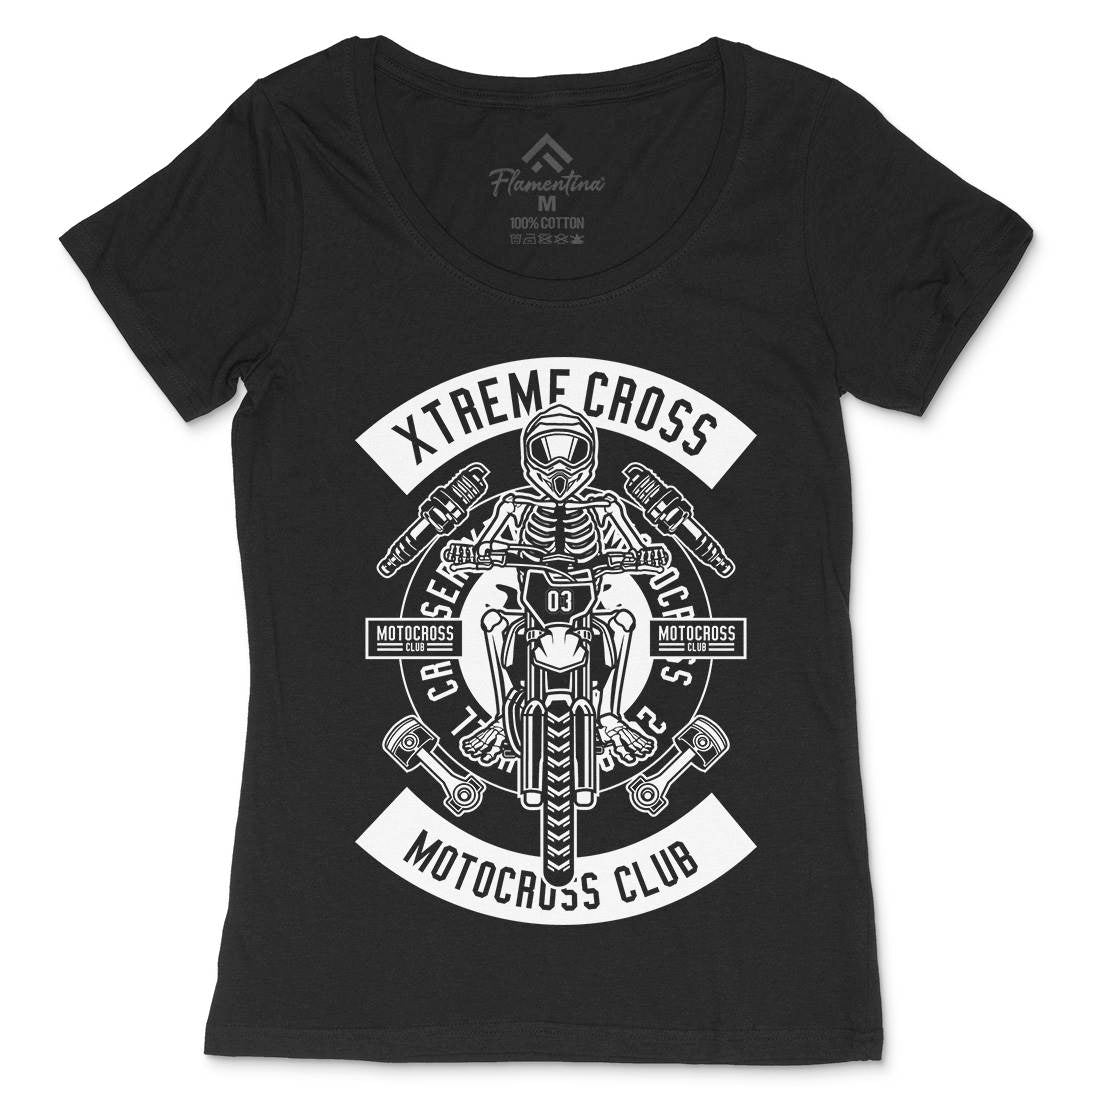 Xtreme Cross Womens Scoop Neck T-Shirt Motorcycles B676